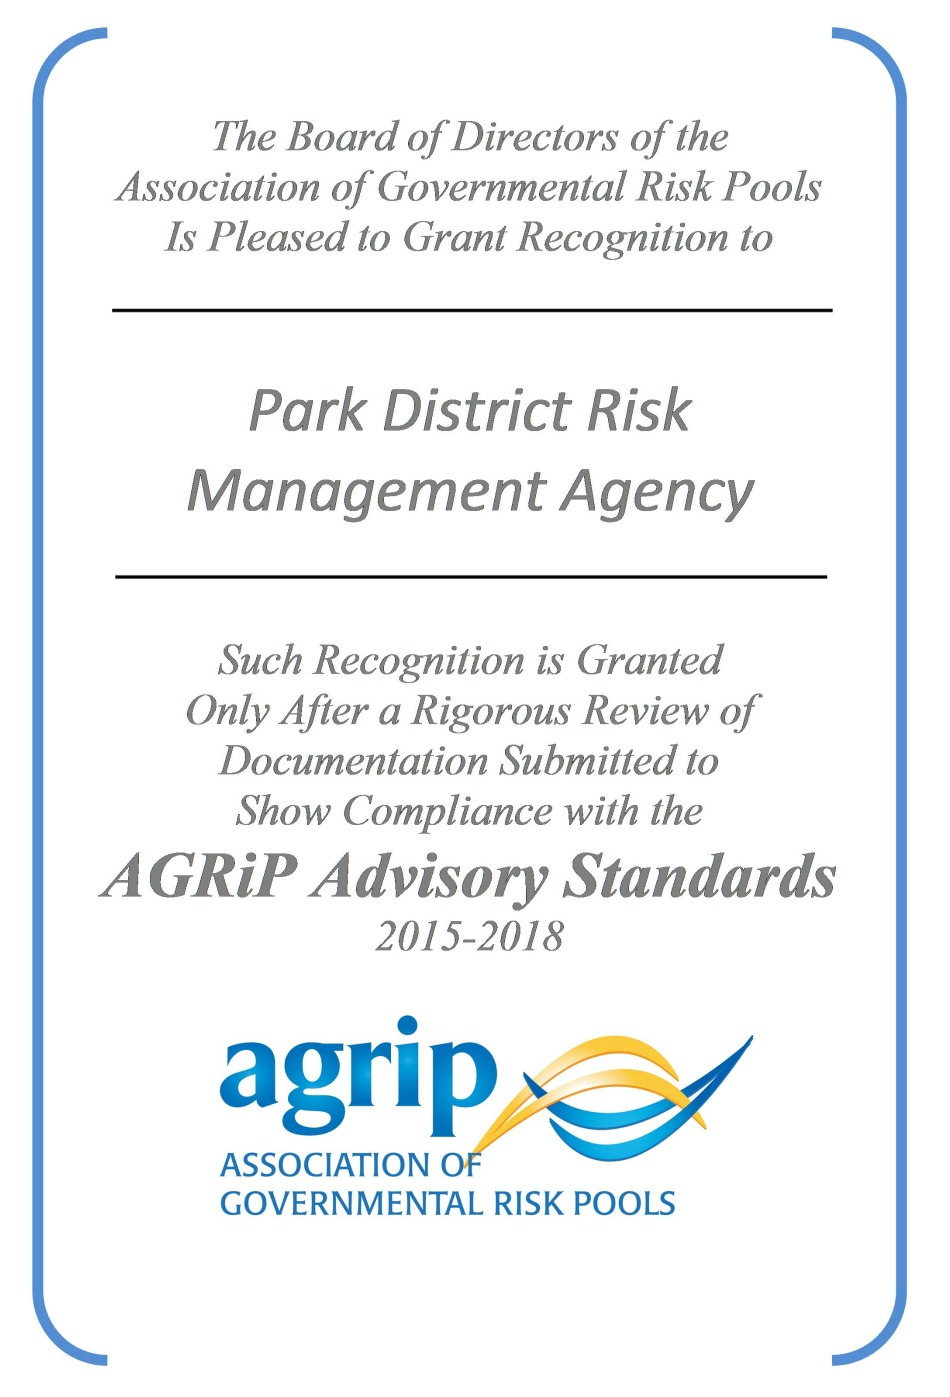 AGRiP Award for Excellence